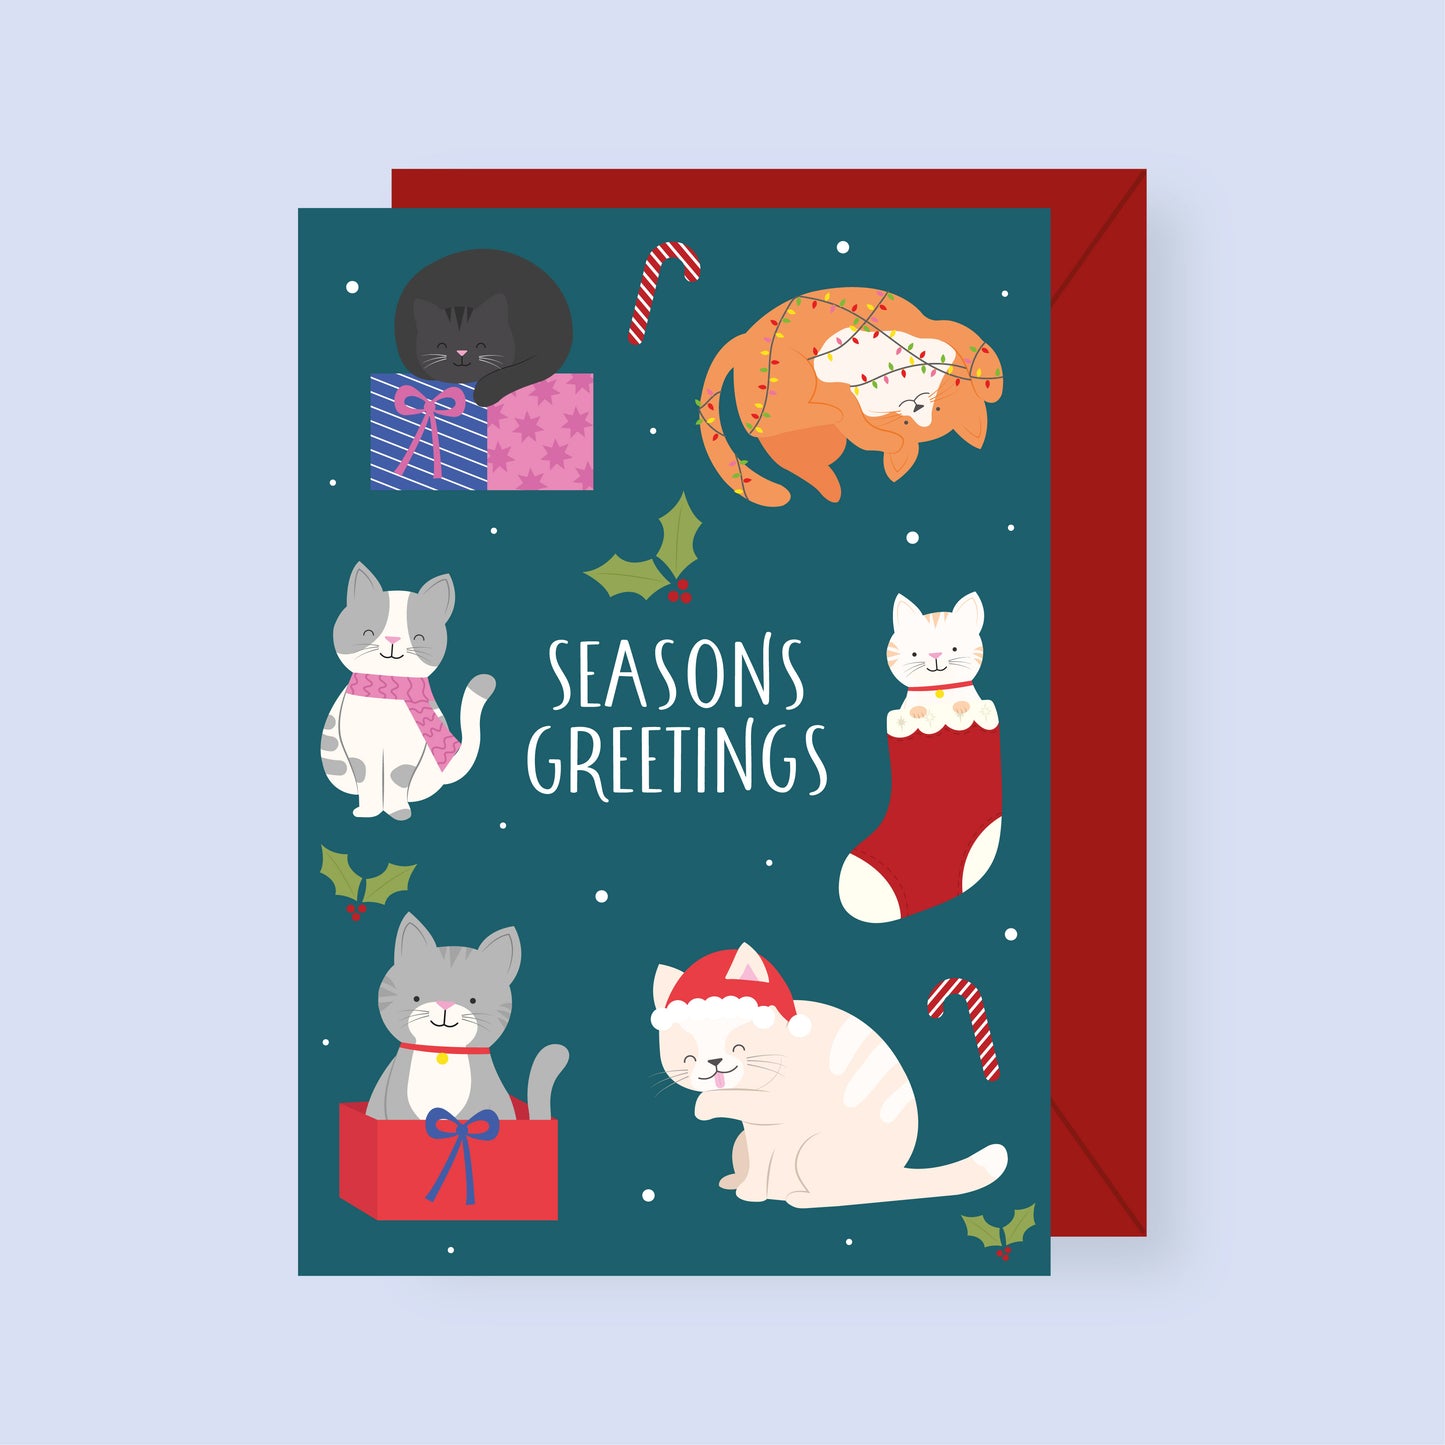 Pack of 10 Festive Christmas cards